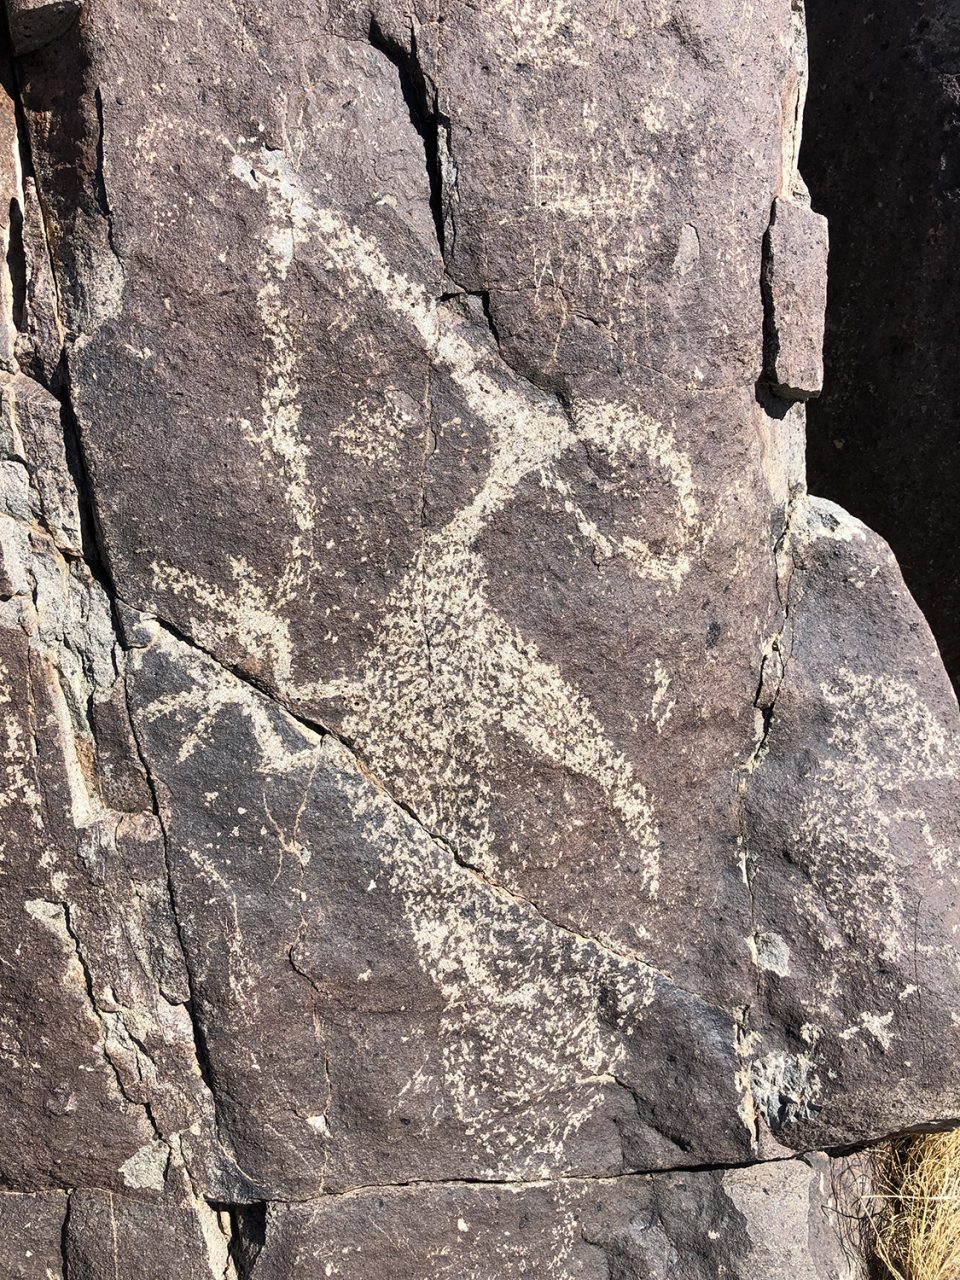 Animal effigy glyph at Three Rivers Petroglyph Site. Photograph by Keith Dotson. Copyright 2022.